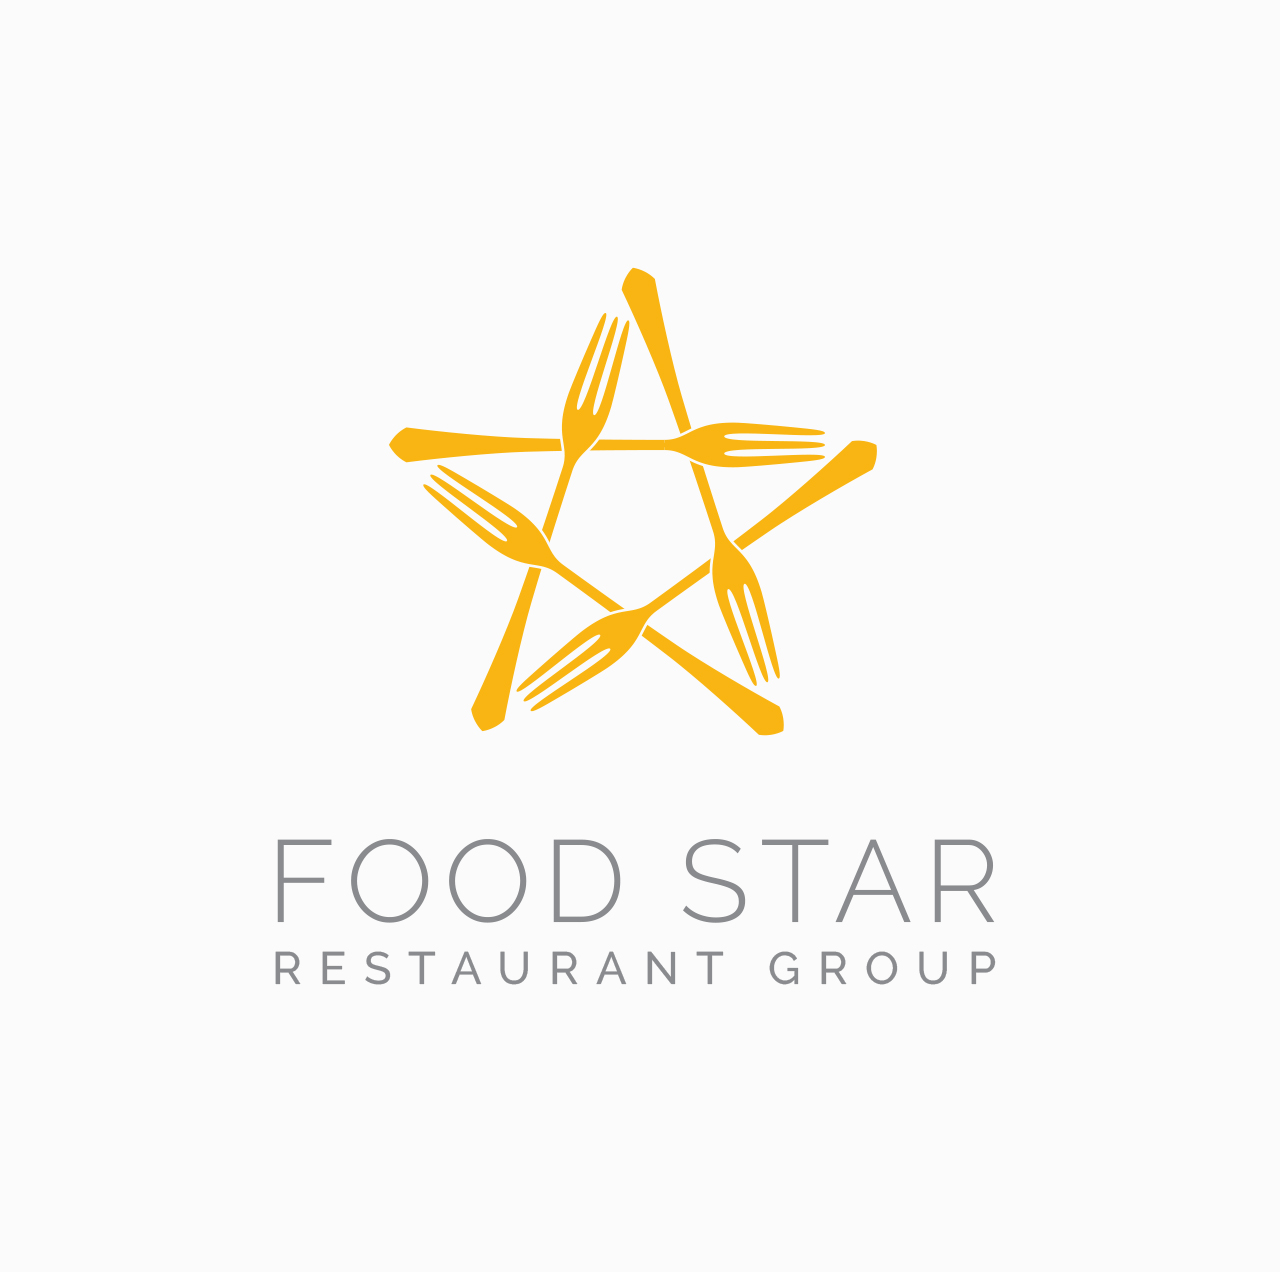 Logo design and type treatment for Food Star Restaurant Group